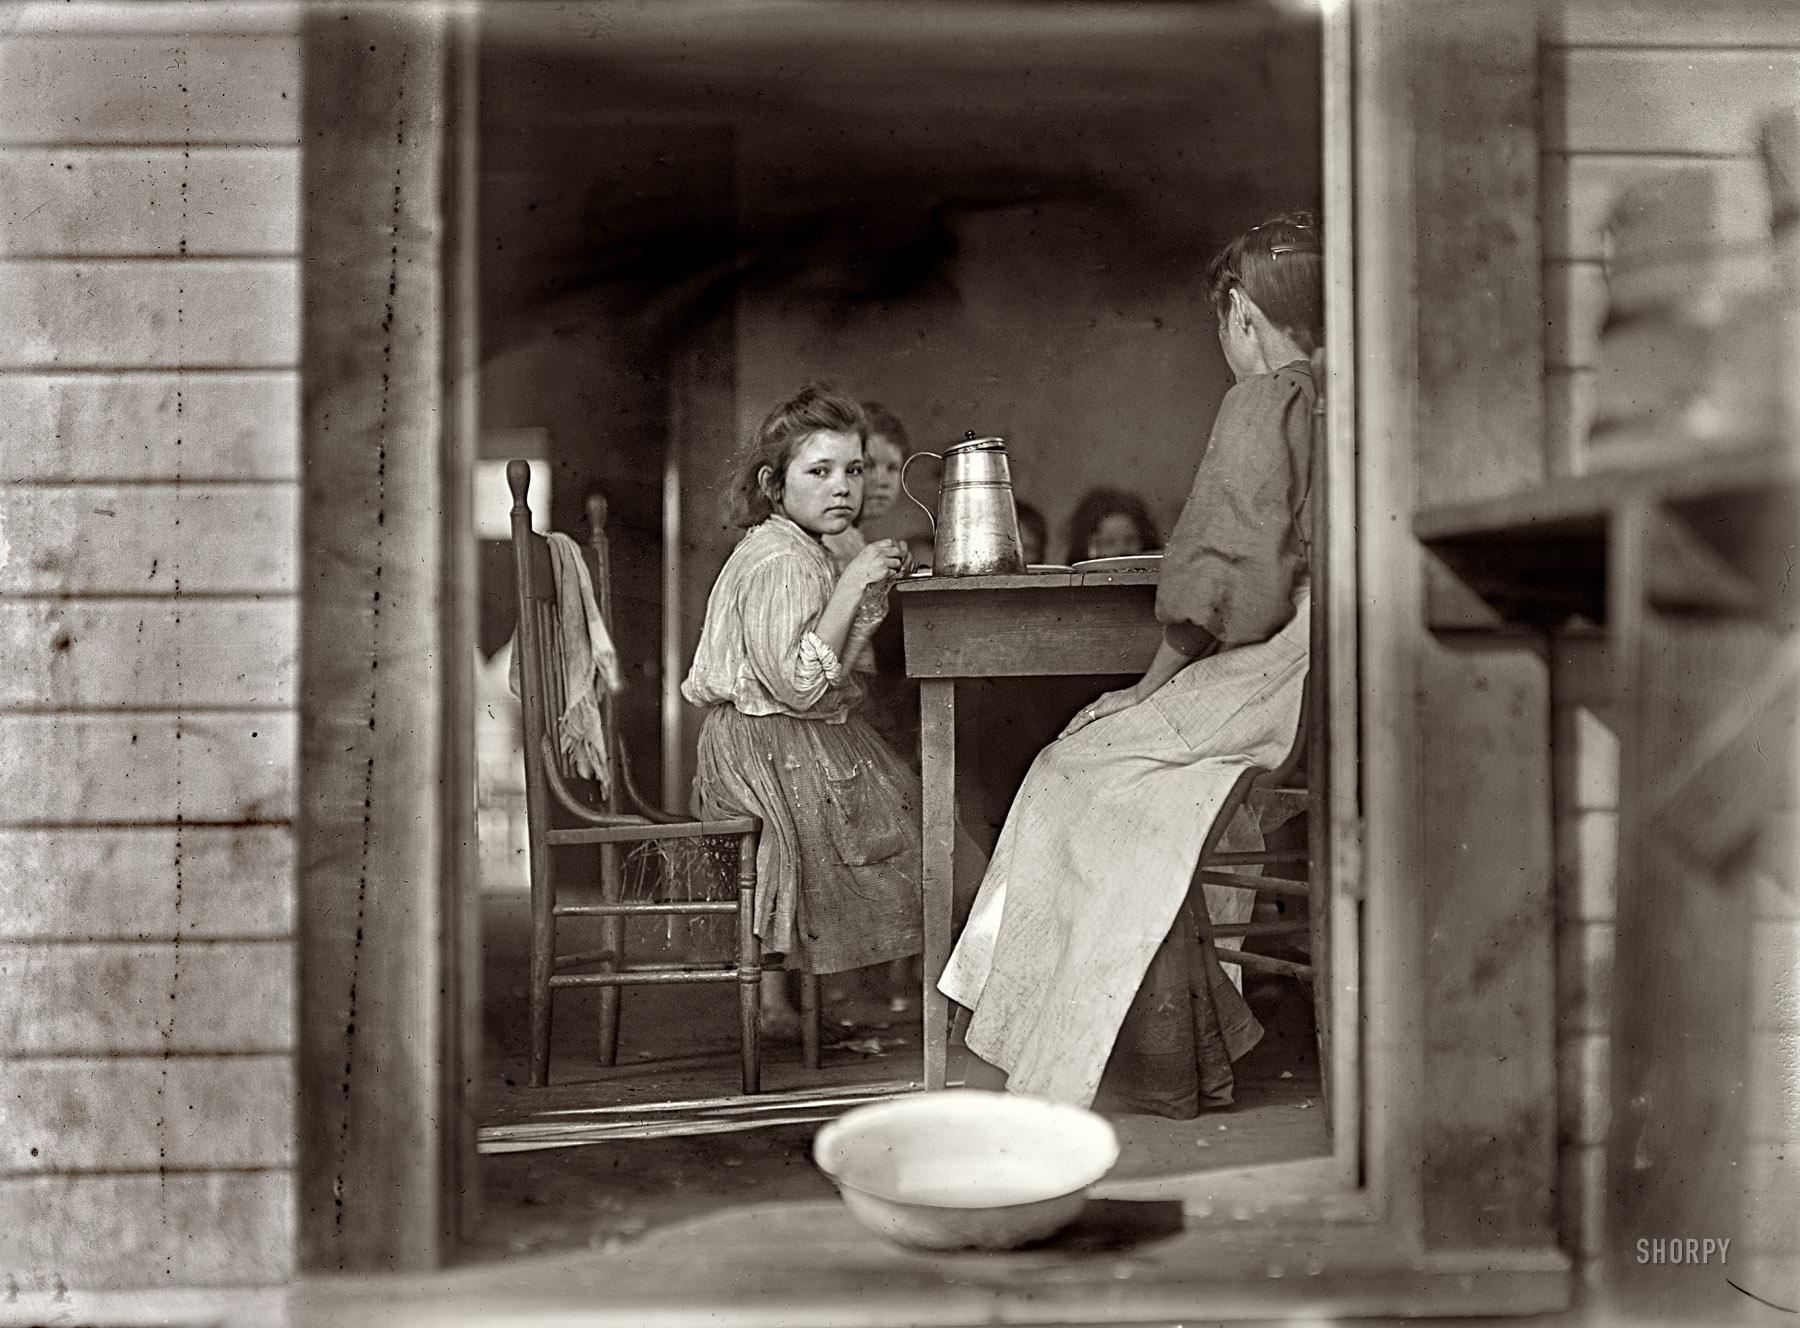 January 22, 1909. "Dinner time. Family of Mrs. A.J. Young, Tifton, Georgia." Last glimpsed here. Joe Manning of the Lewis Hine Project, who has spent five years unraveling the Young family's history, tells their story here in fascinating detail. Photograph by Lewis Wickes Hine. View full size.